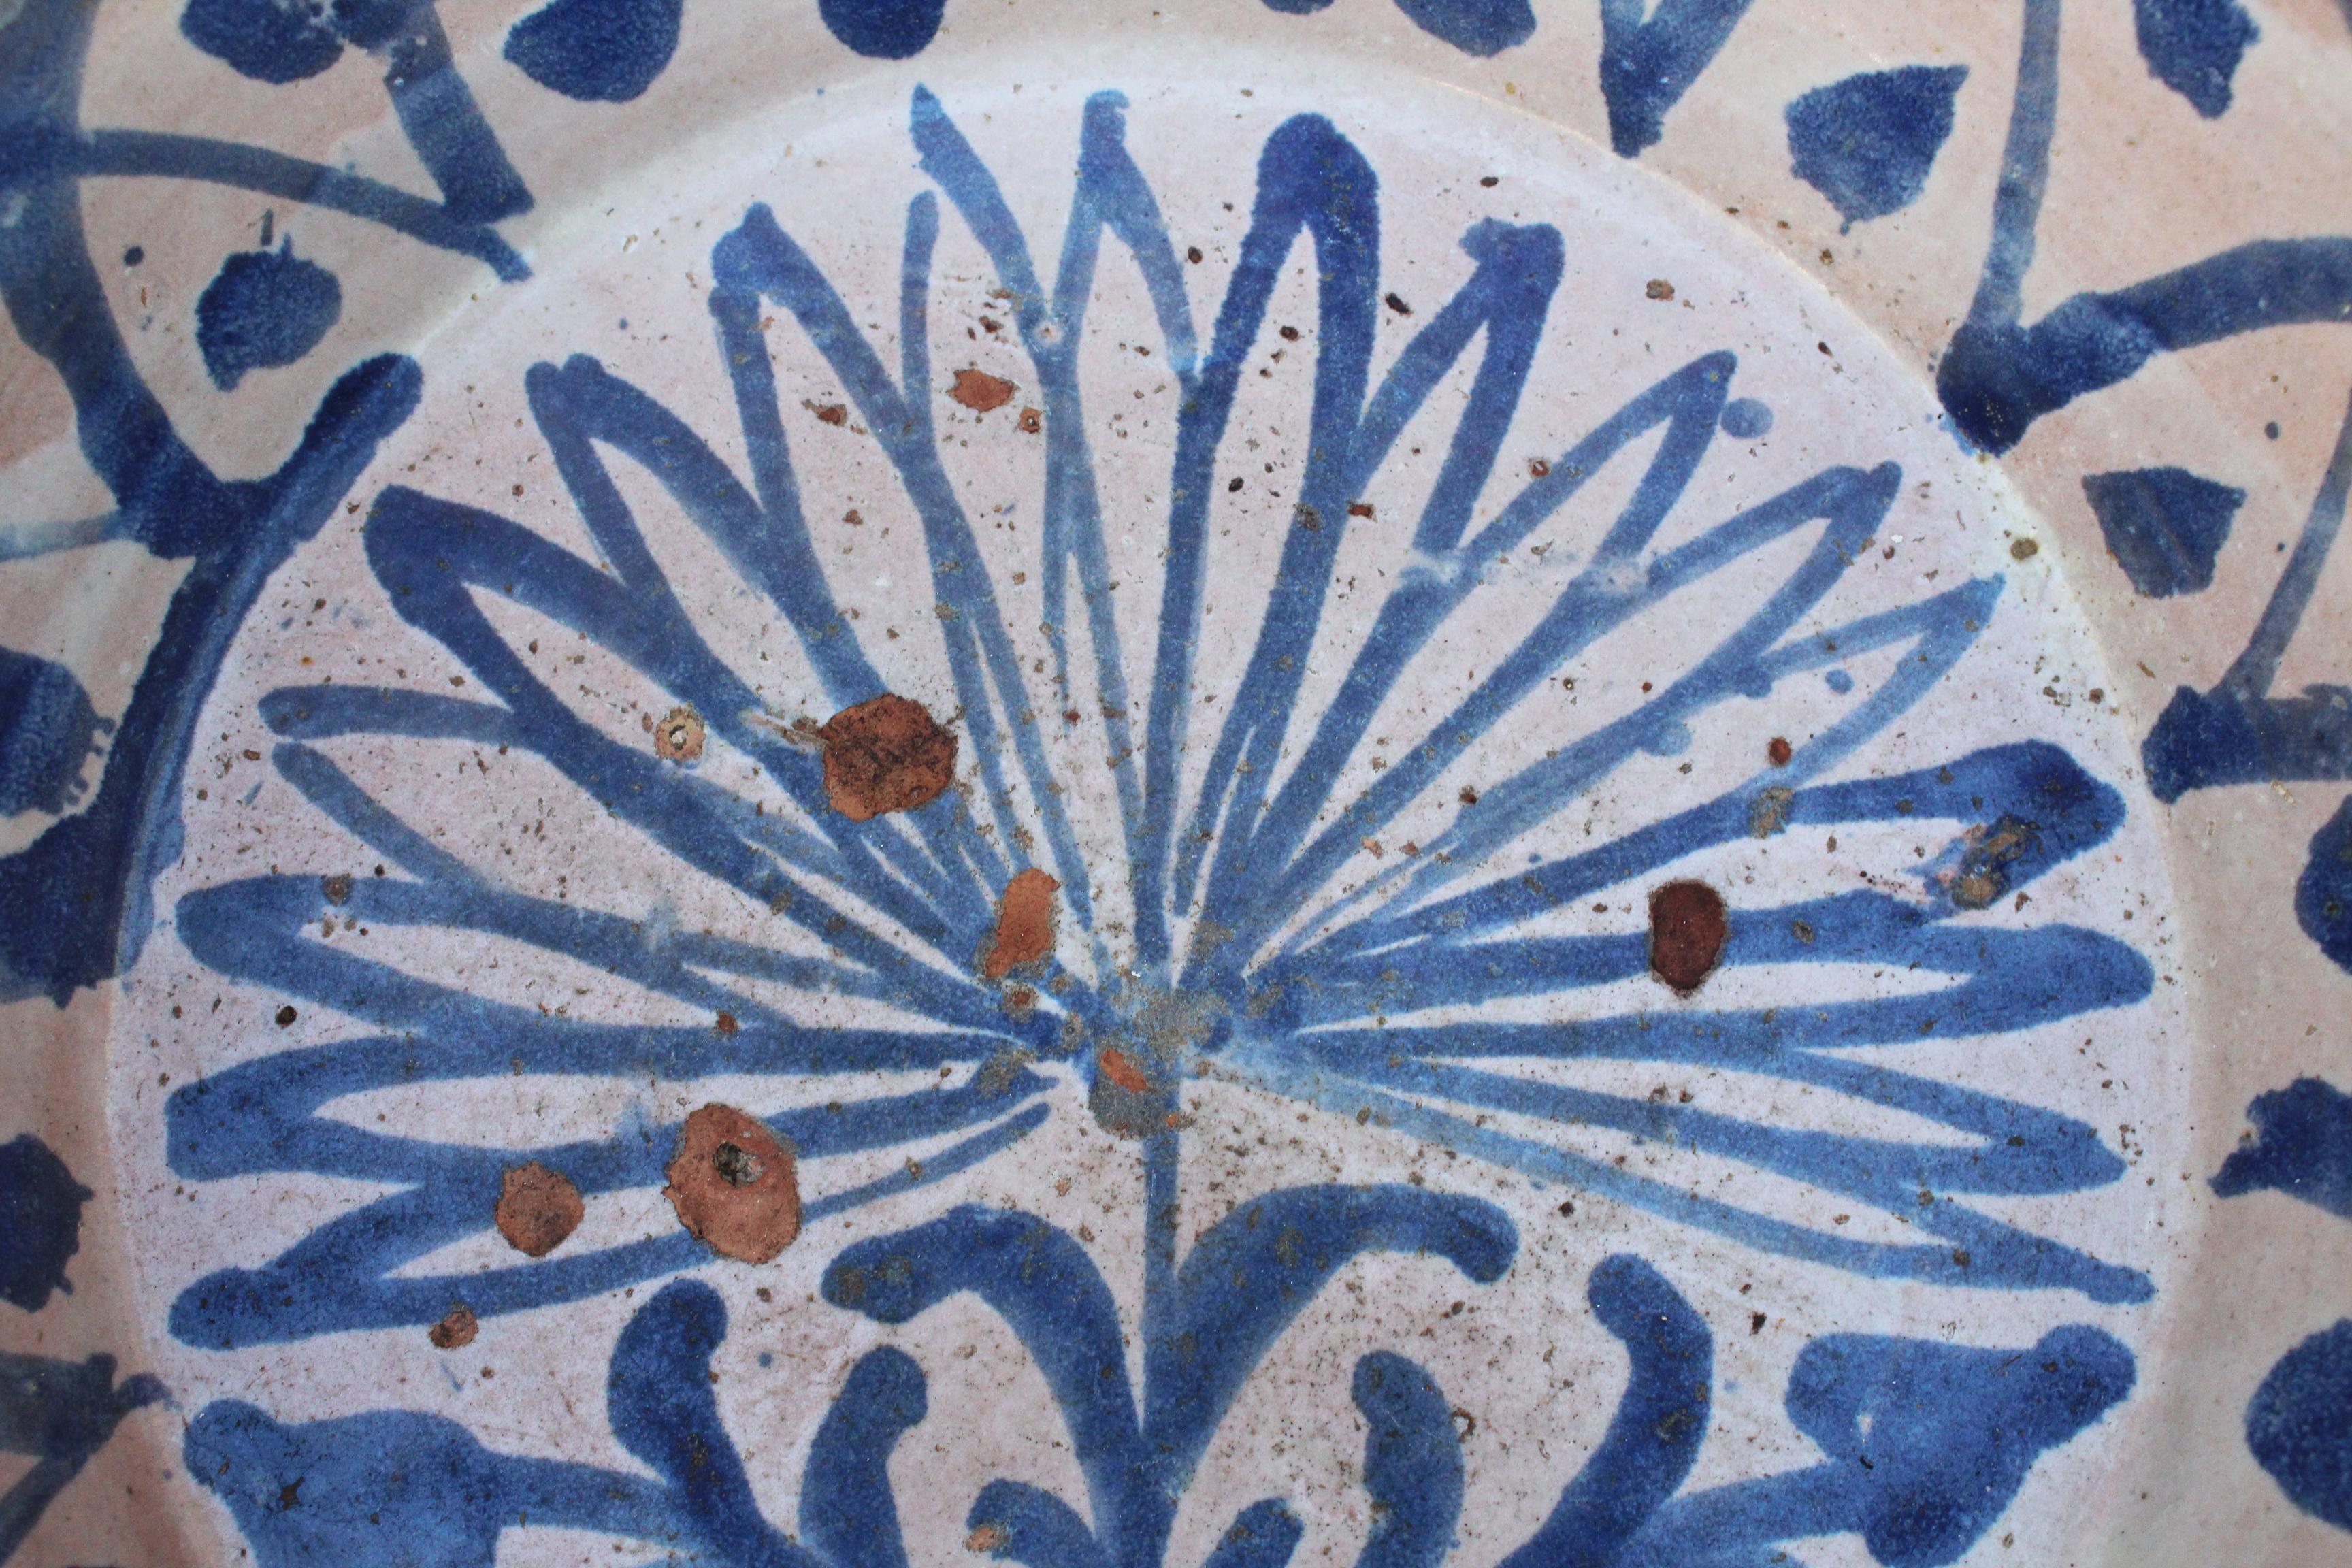 19th century Spanish Fajalauza white and blue glazed terracotta decorative plate painted with flowers. 

Fajalauza is a style that originates in Granada's Albaicín suburb, known for its mix of Christian and Al-Andalus cultures, as can be admired